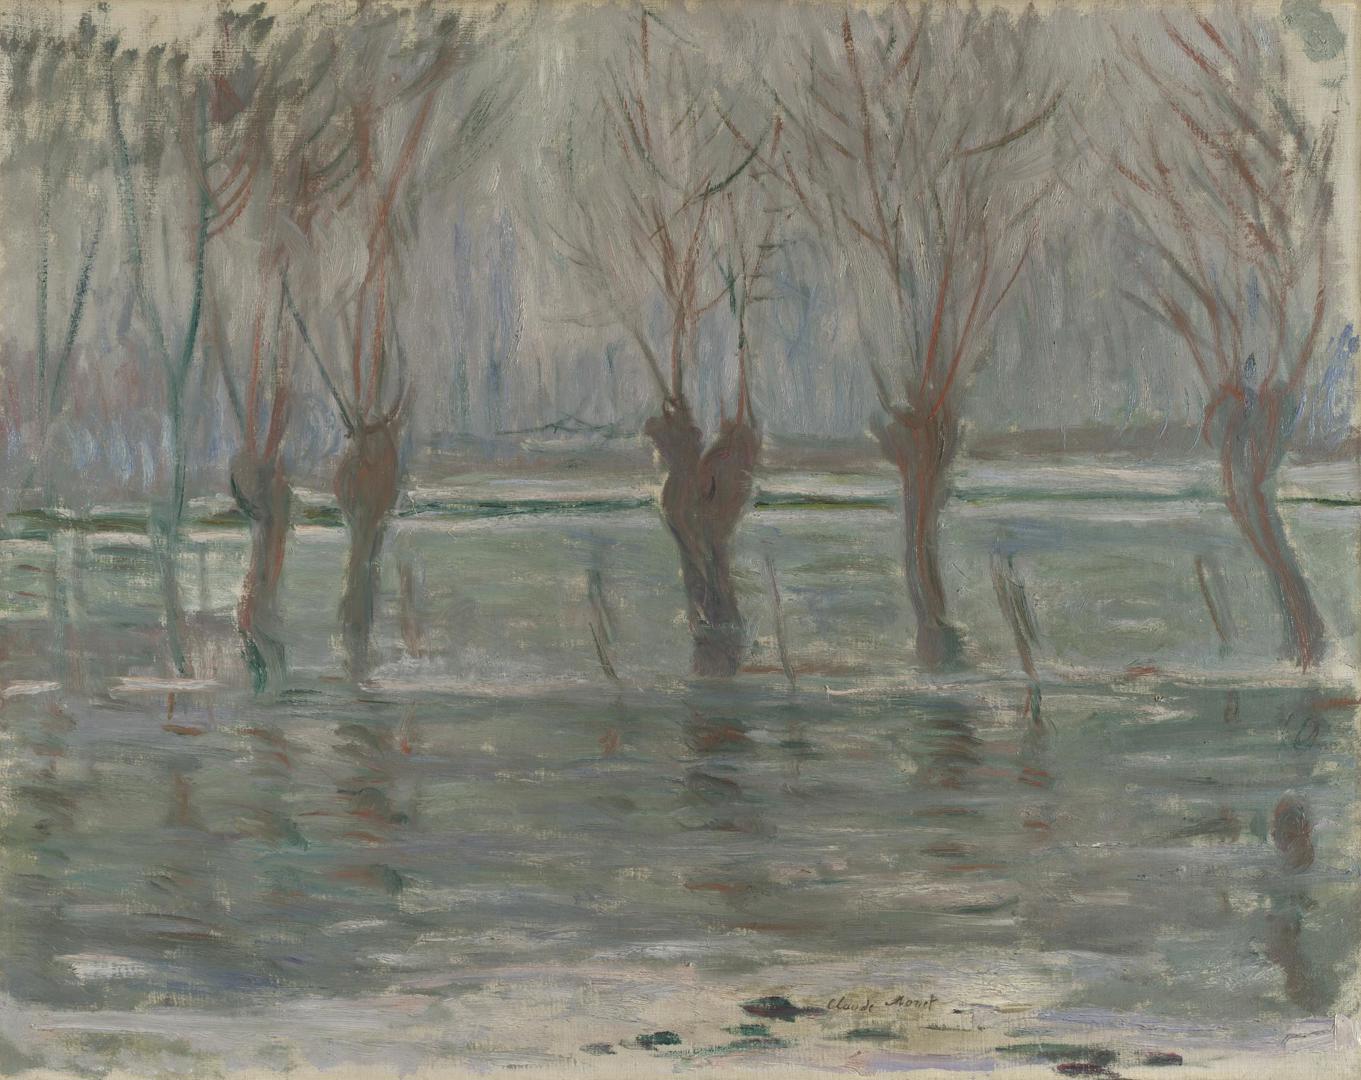 Flood Waters by Claude Monet